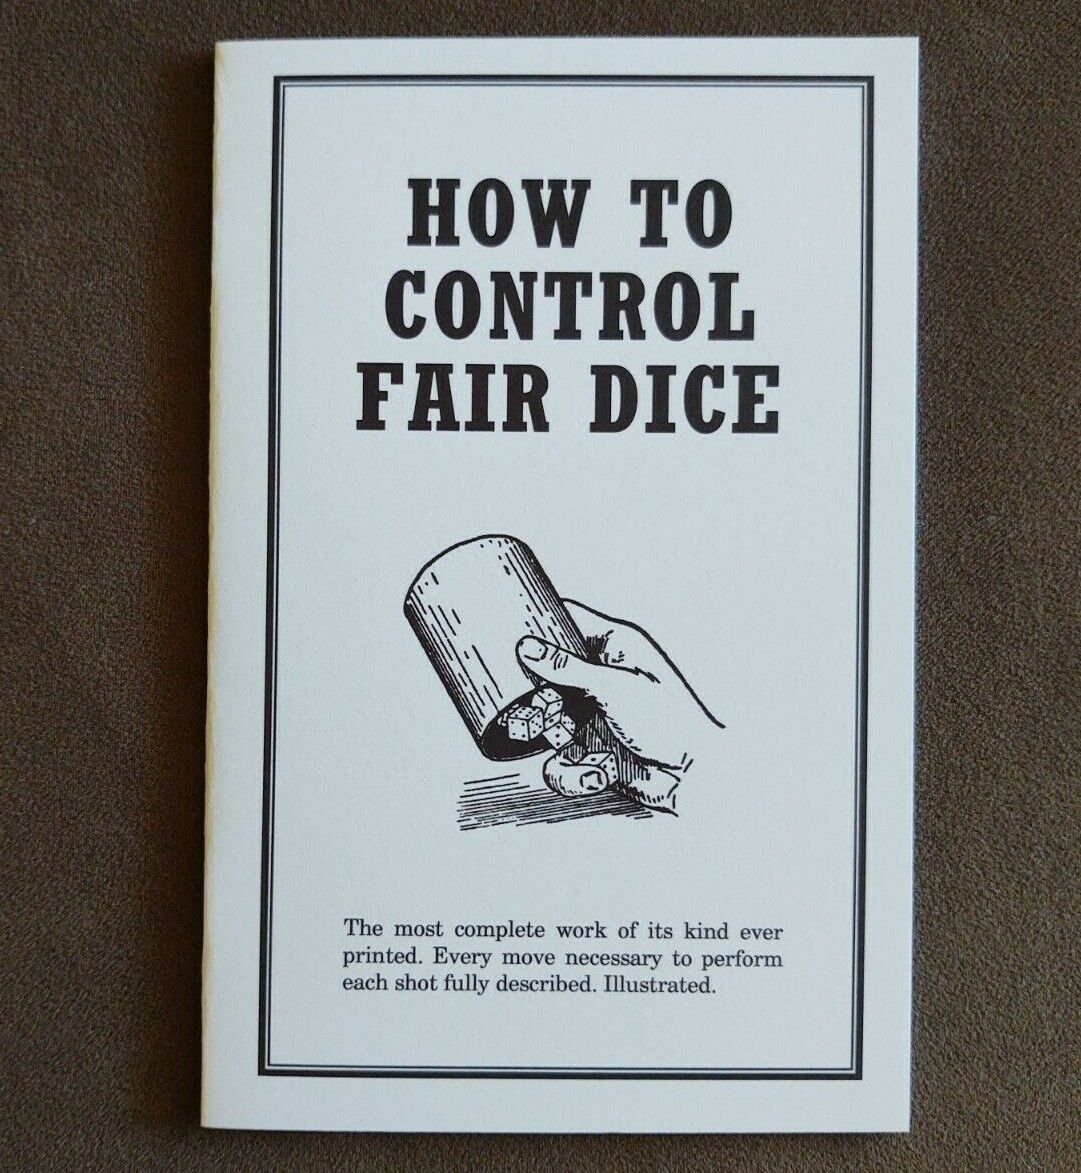 How to Control Fair Dice (Classic crooked gambling text)